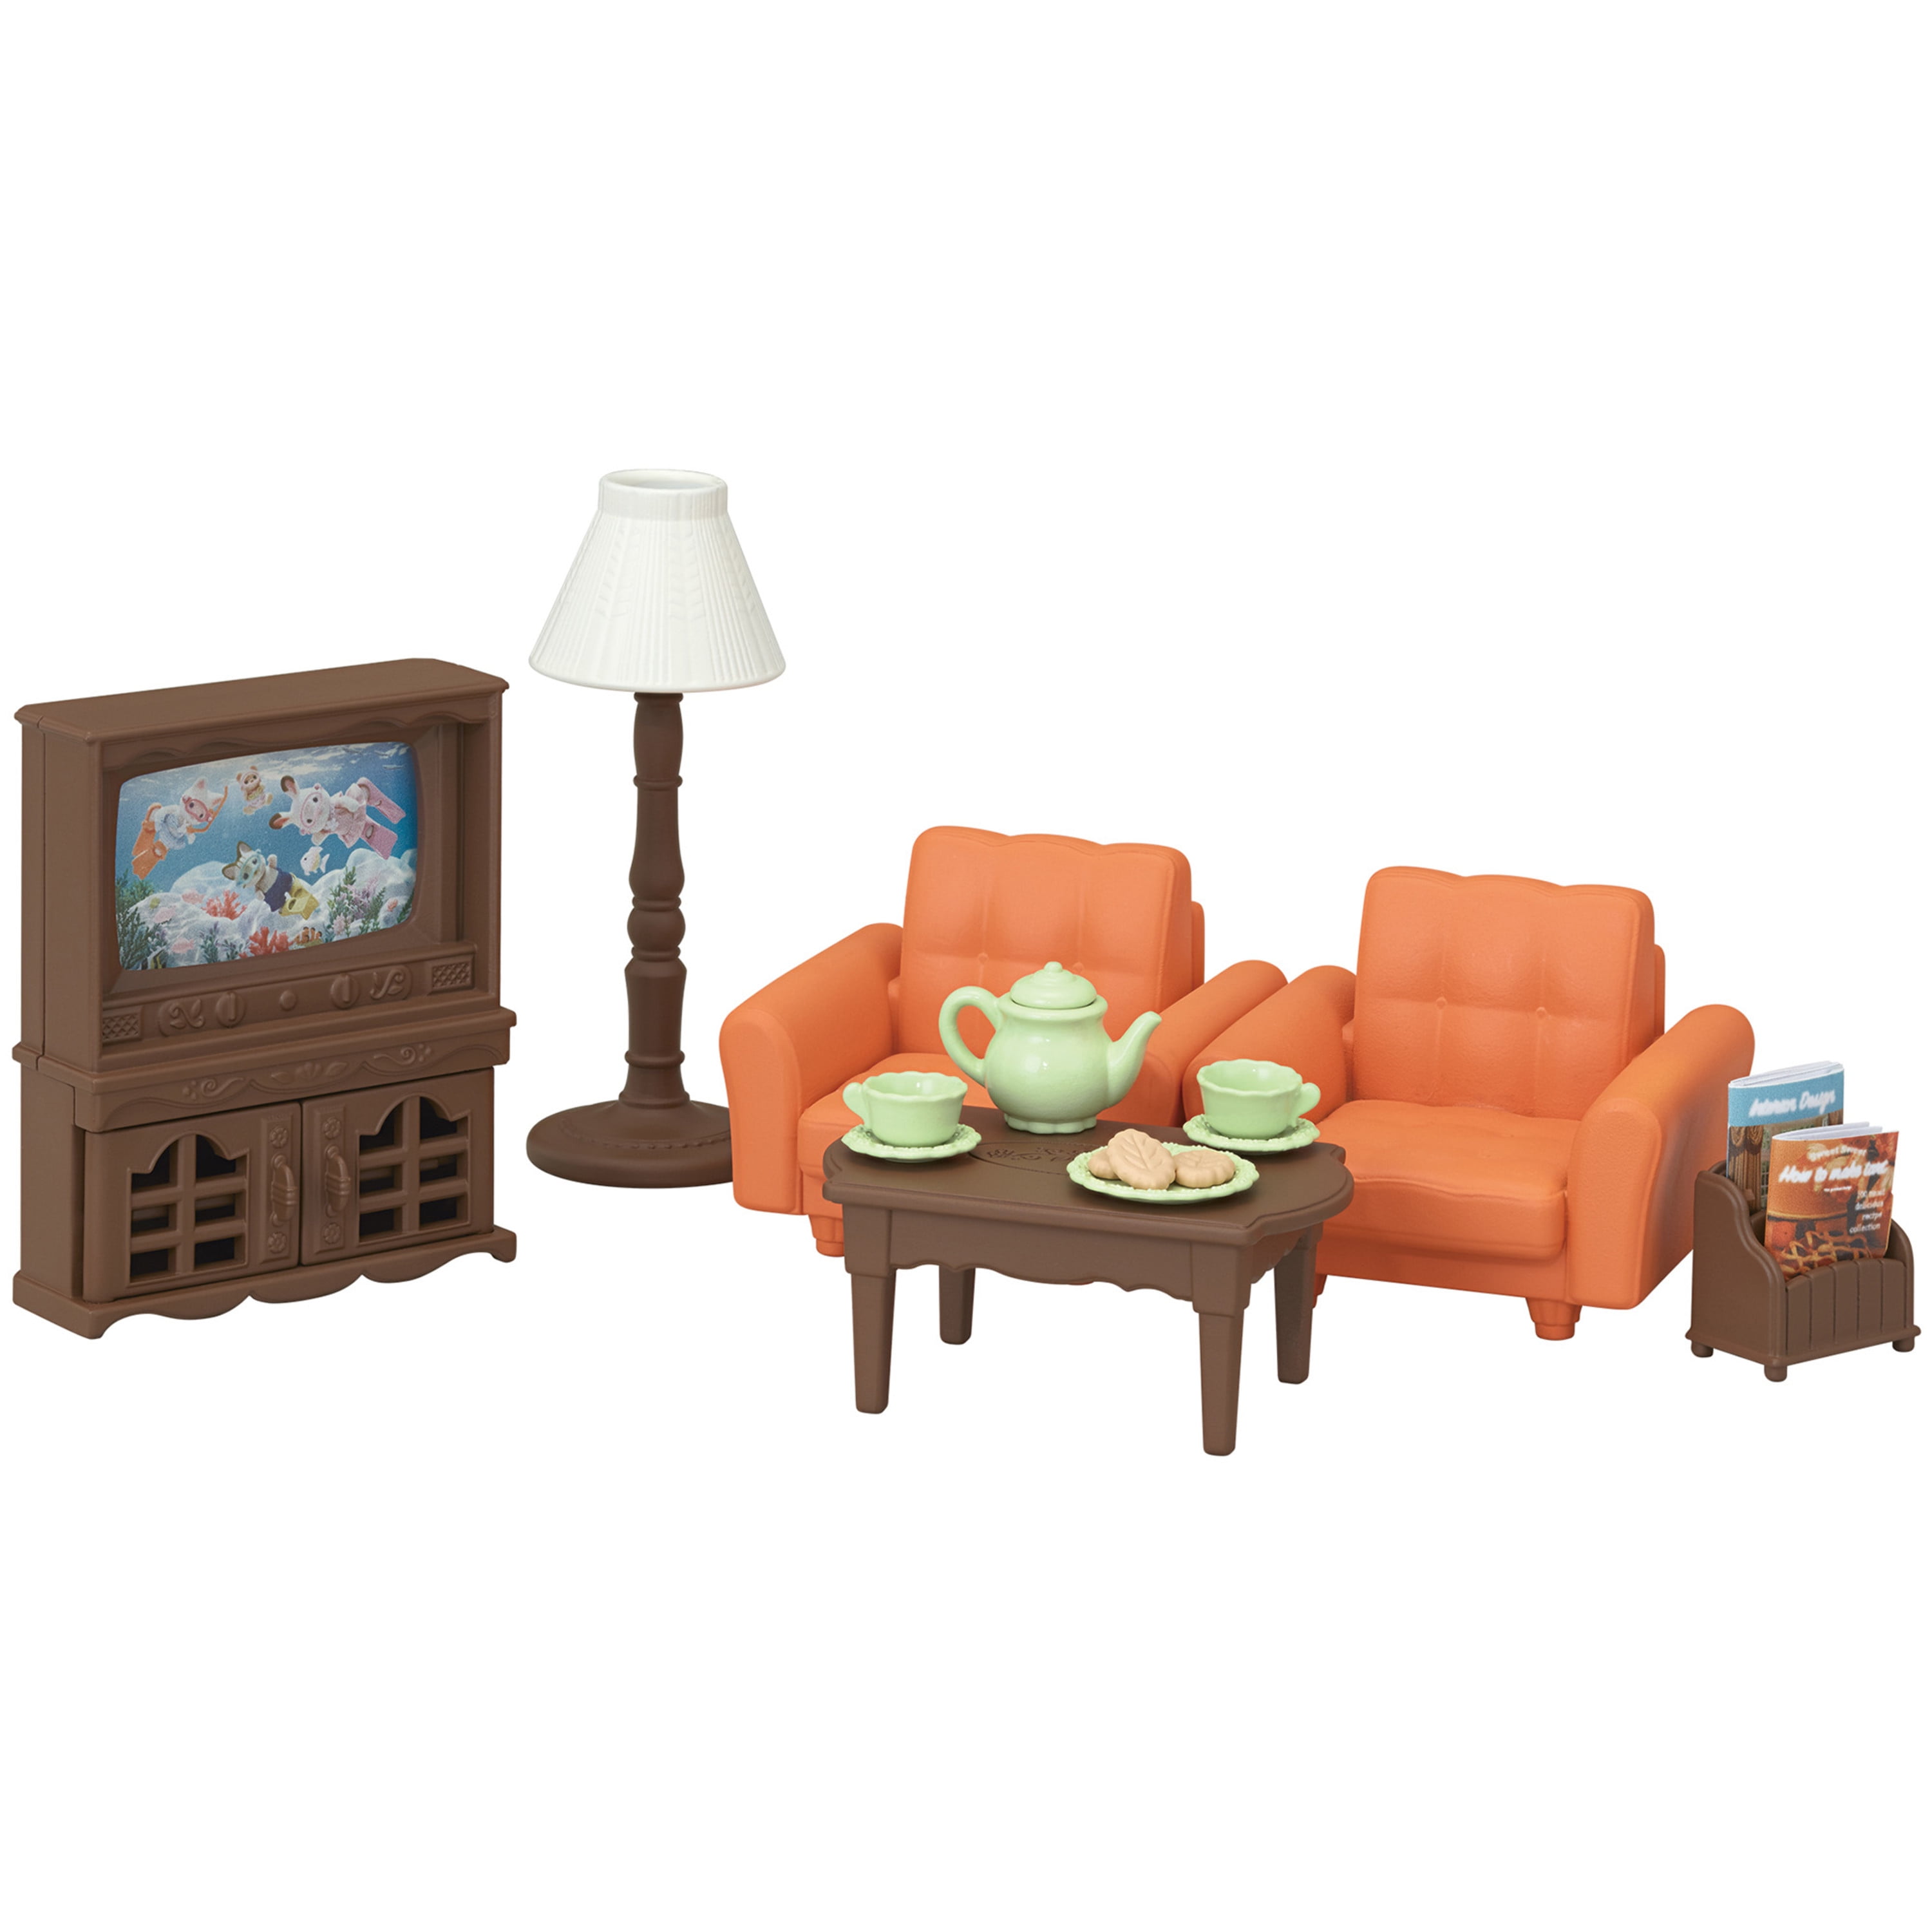 2 Sets Armchair with Sofa Set and Home Party Set Sylvanian Families 